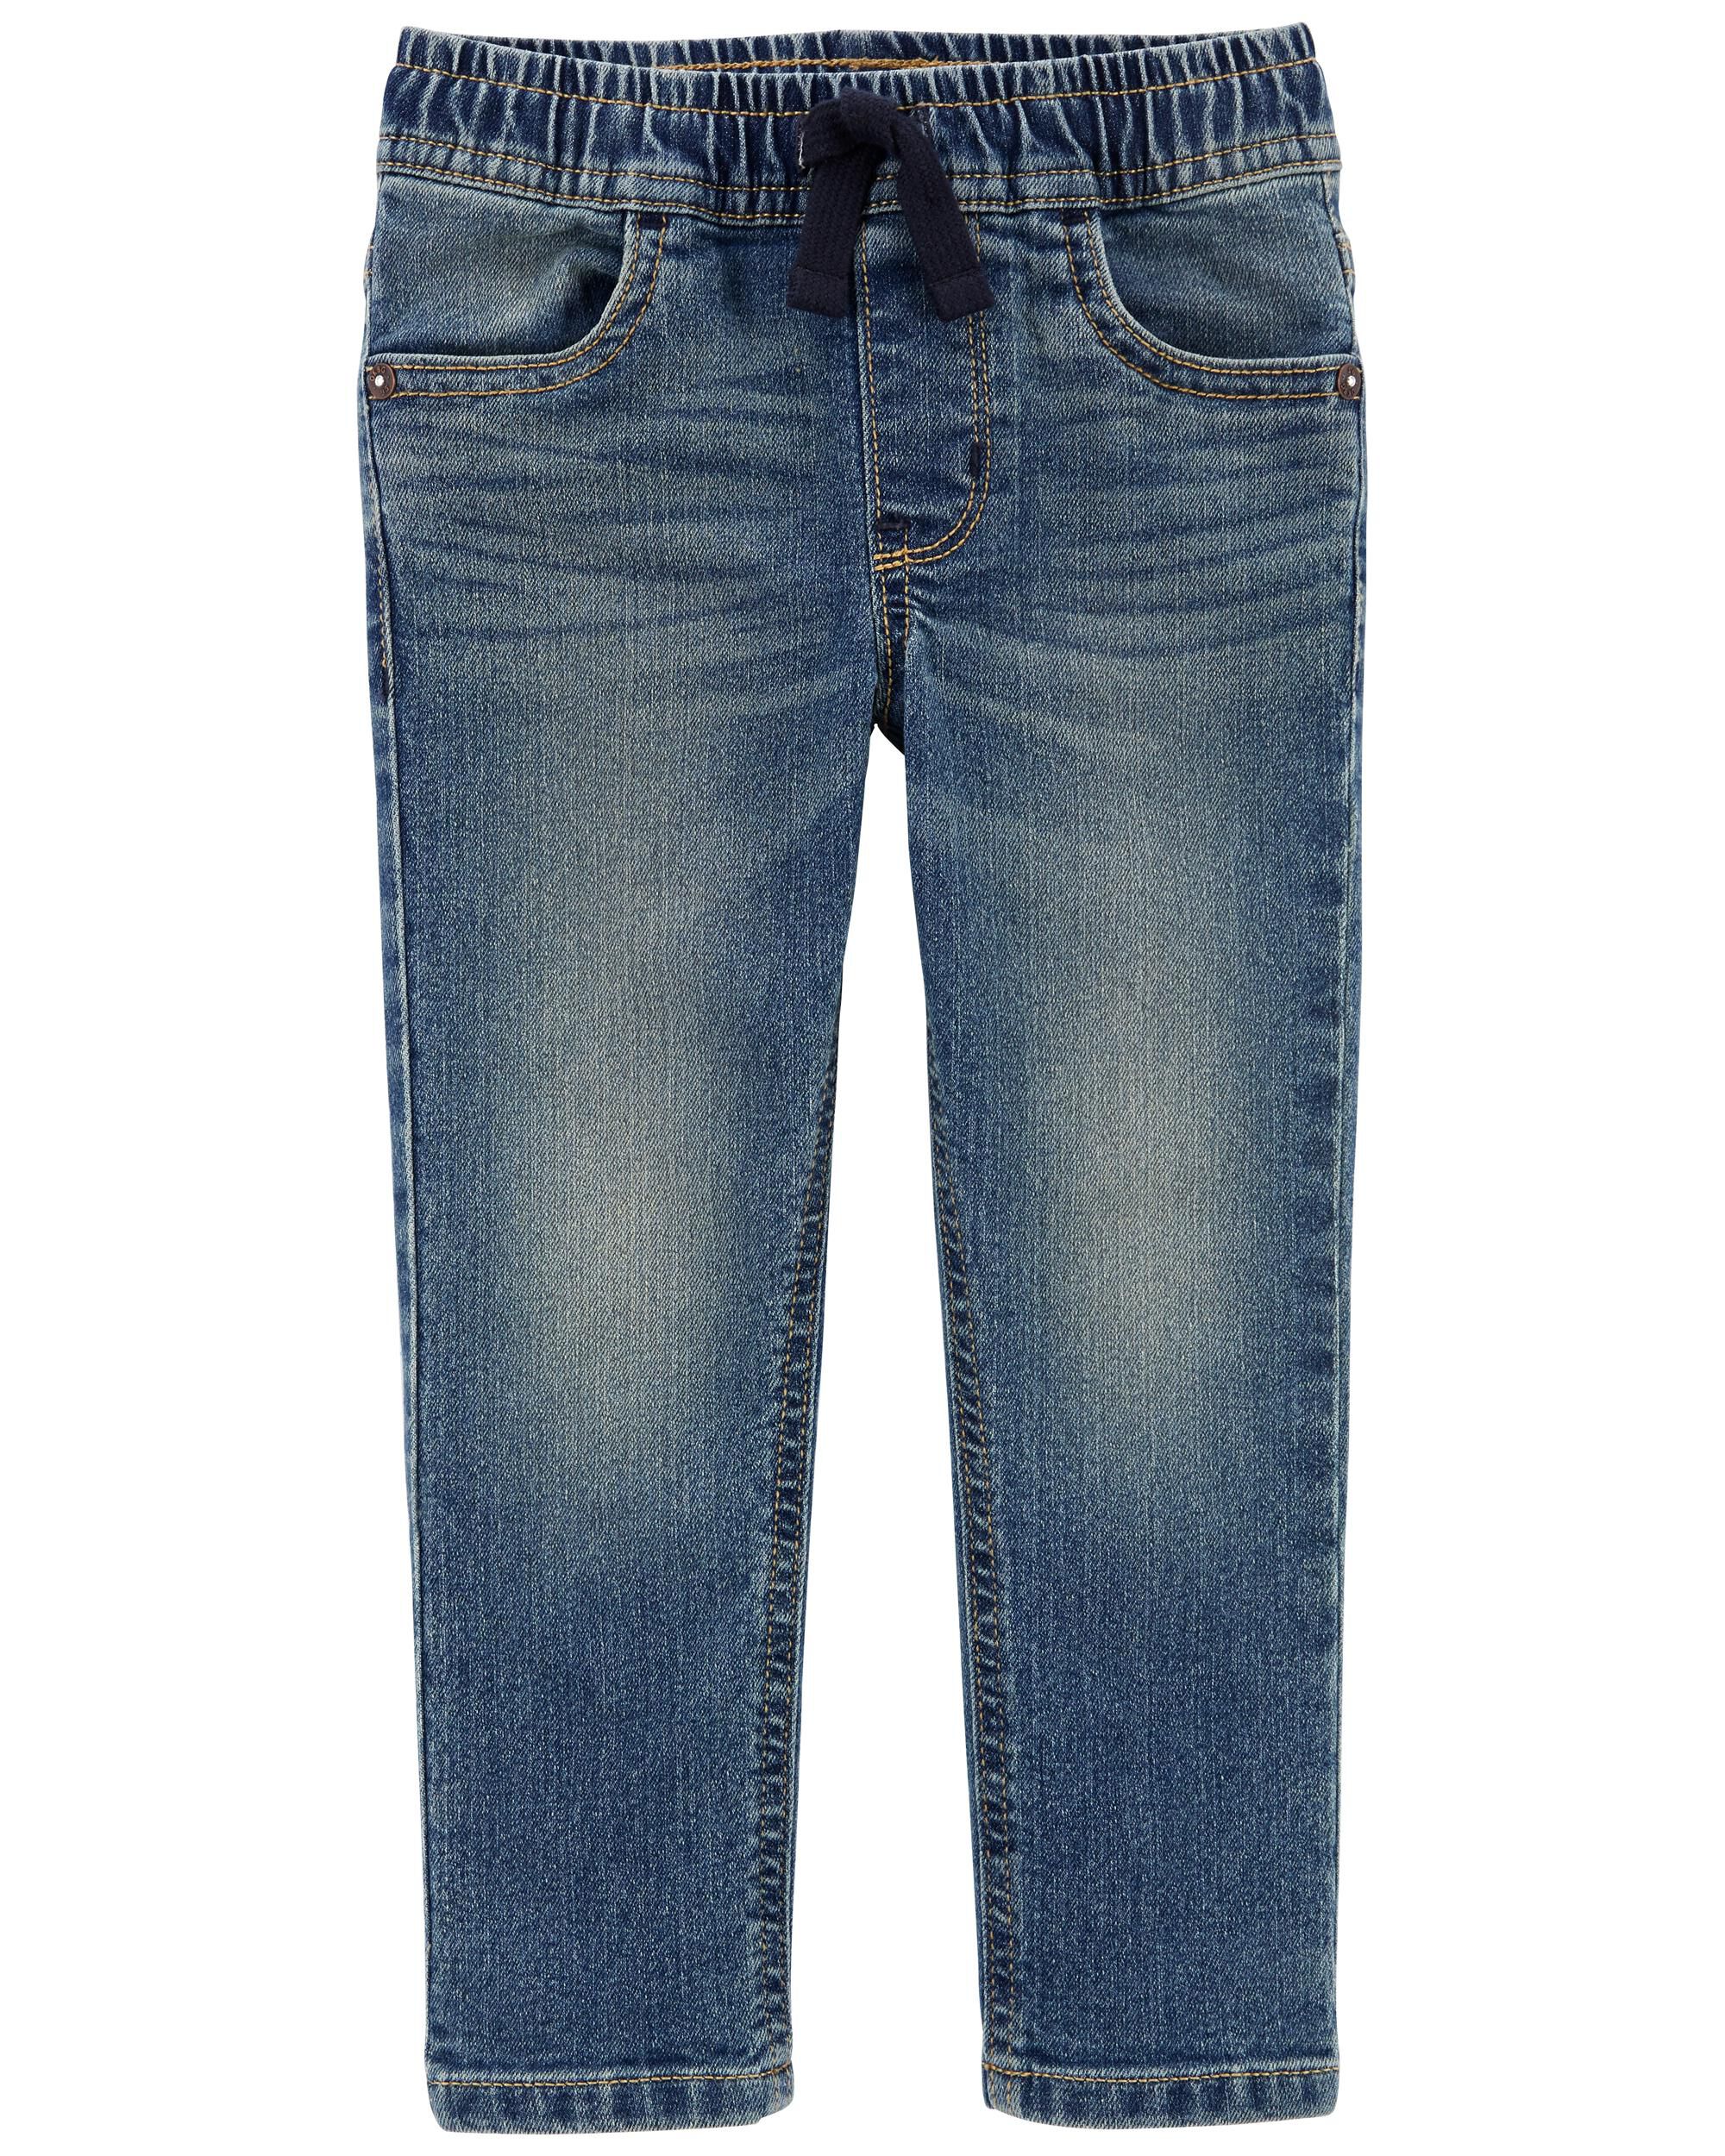 Carters Relaxed Jeans: Tapered Remix